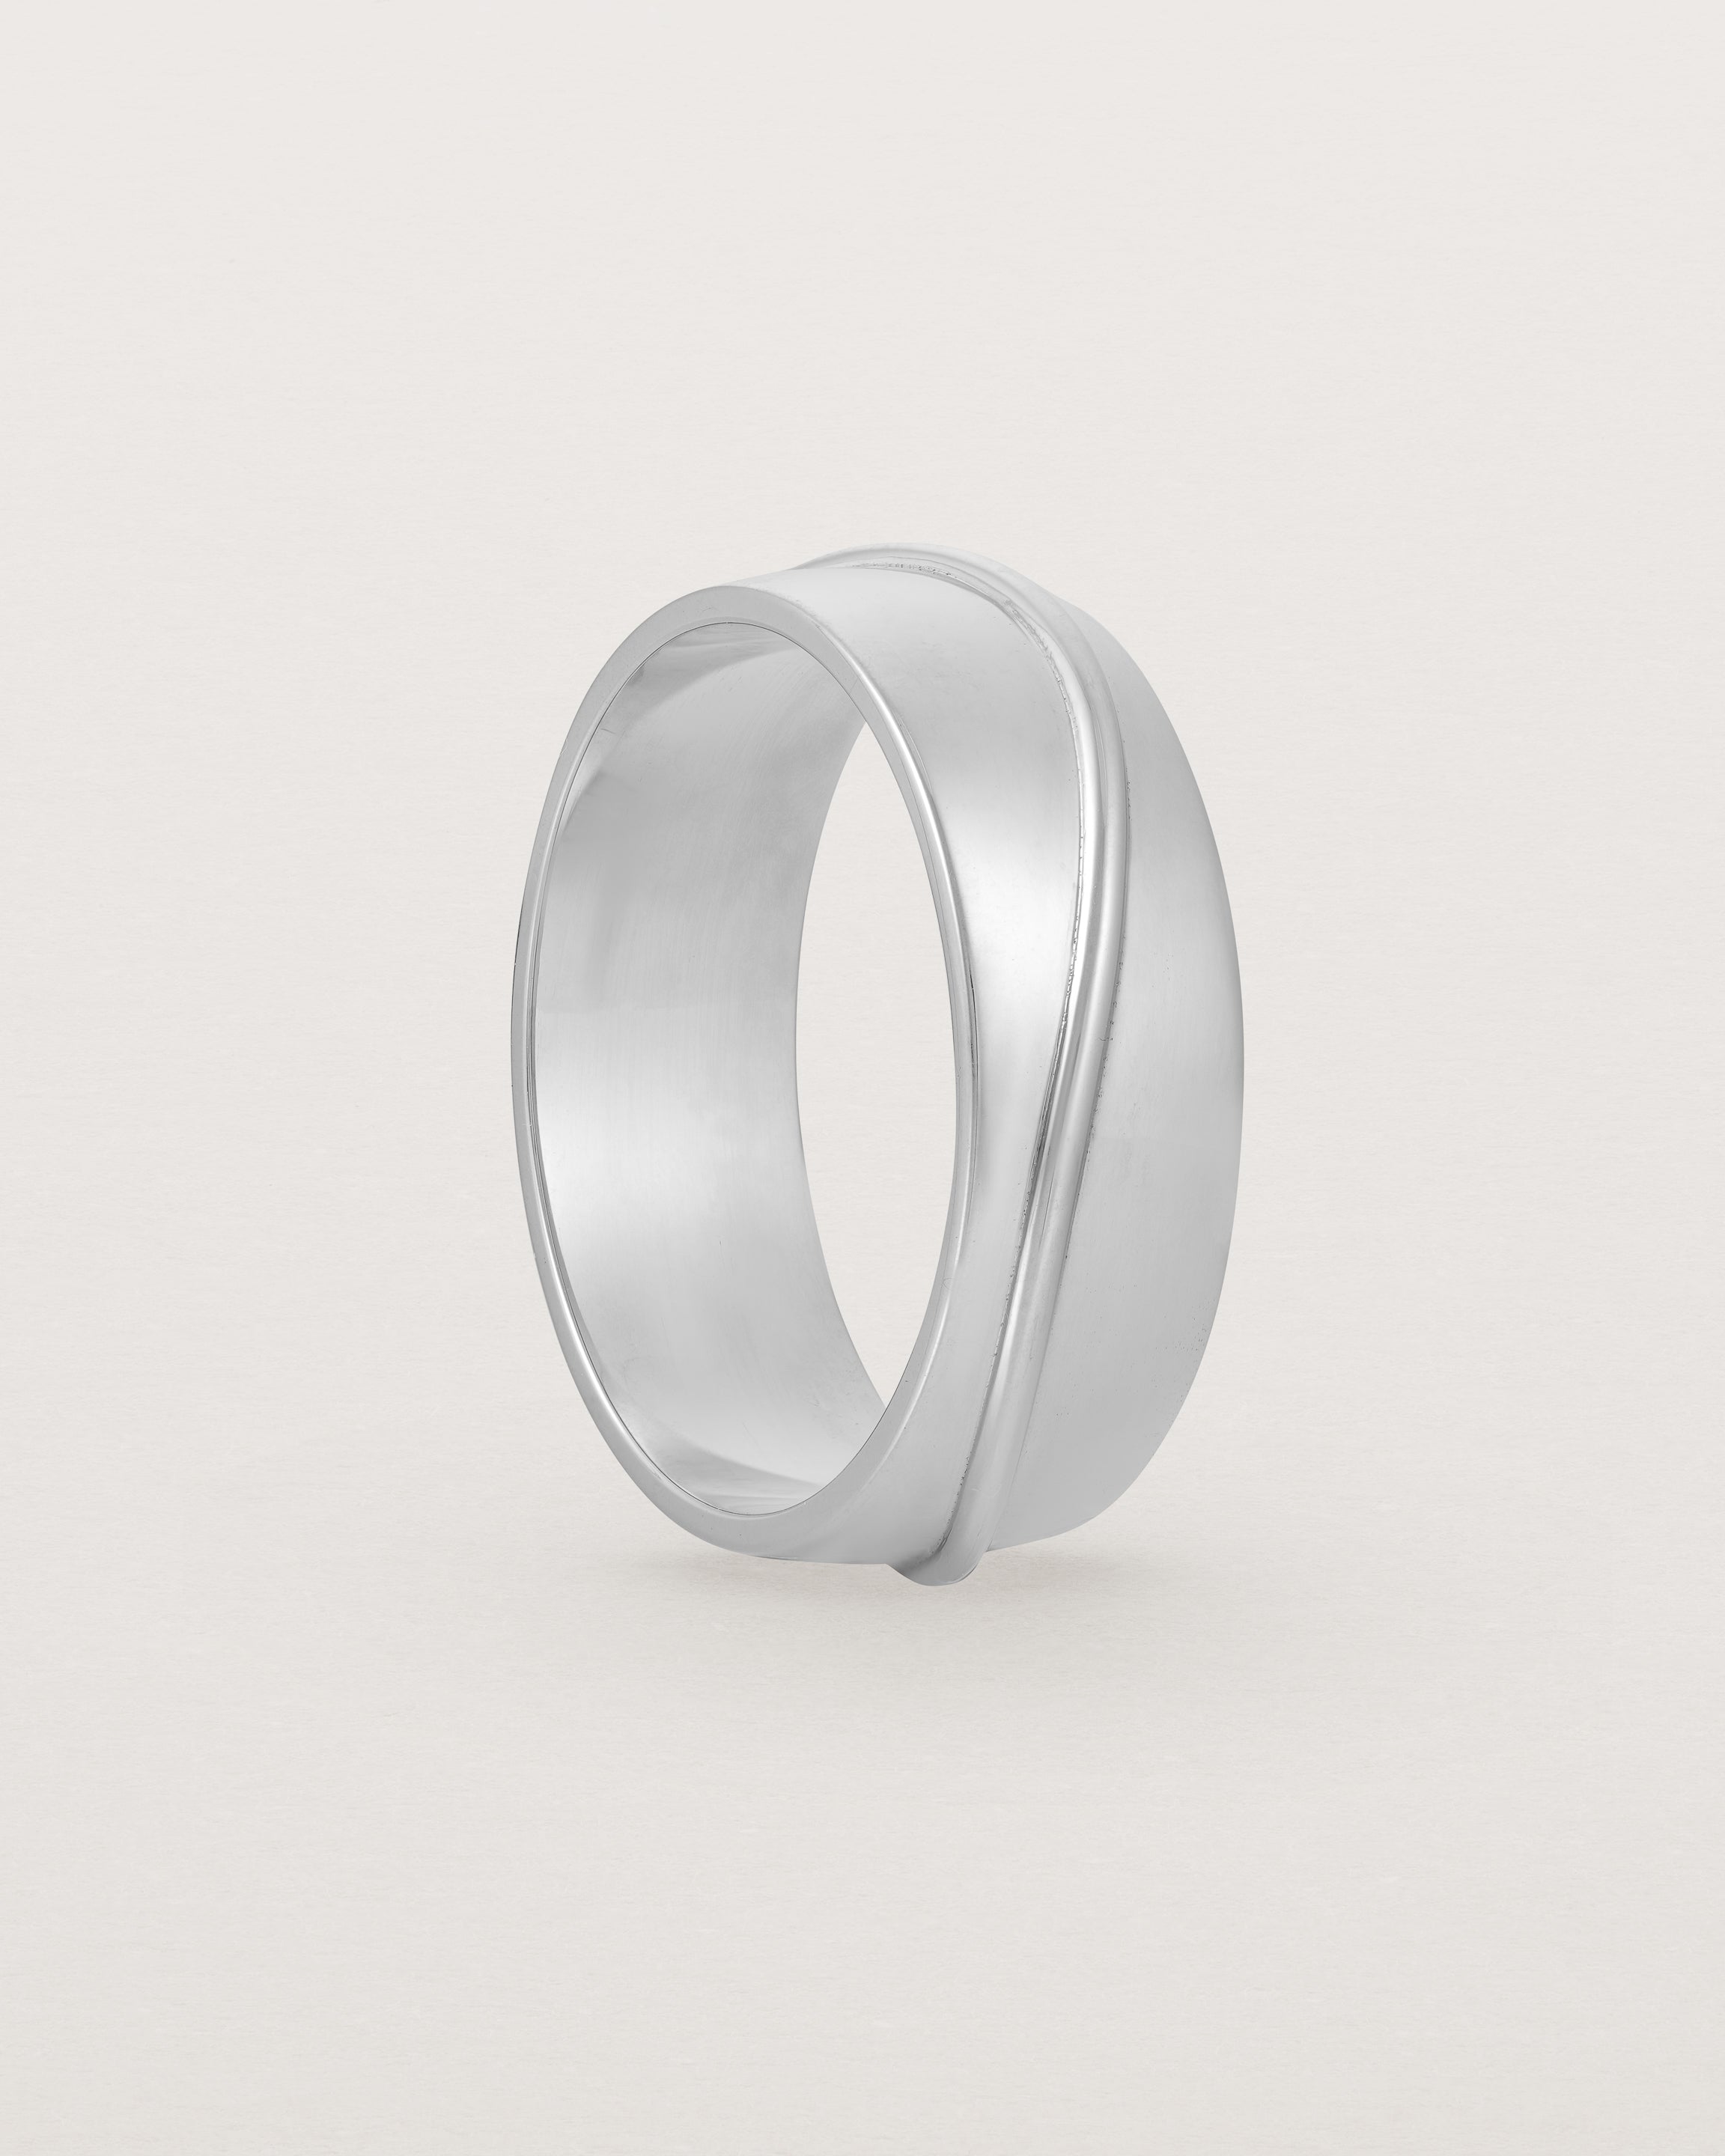 Angled view of the Surge Wedding Ring | 7mm | White Gold.